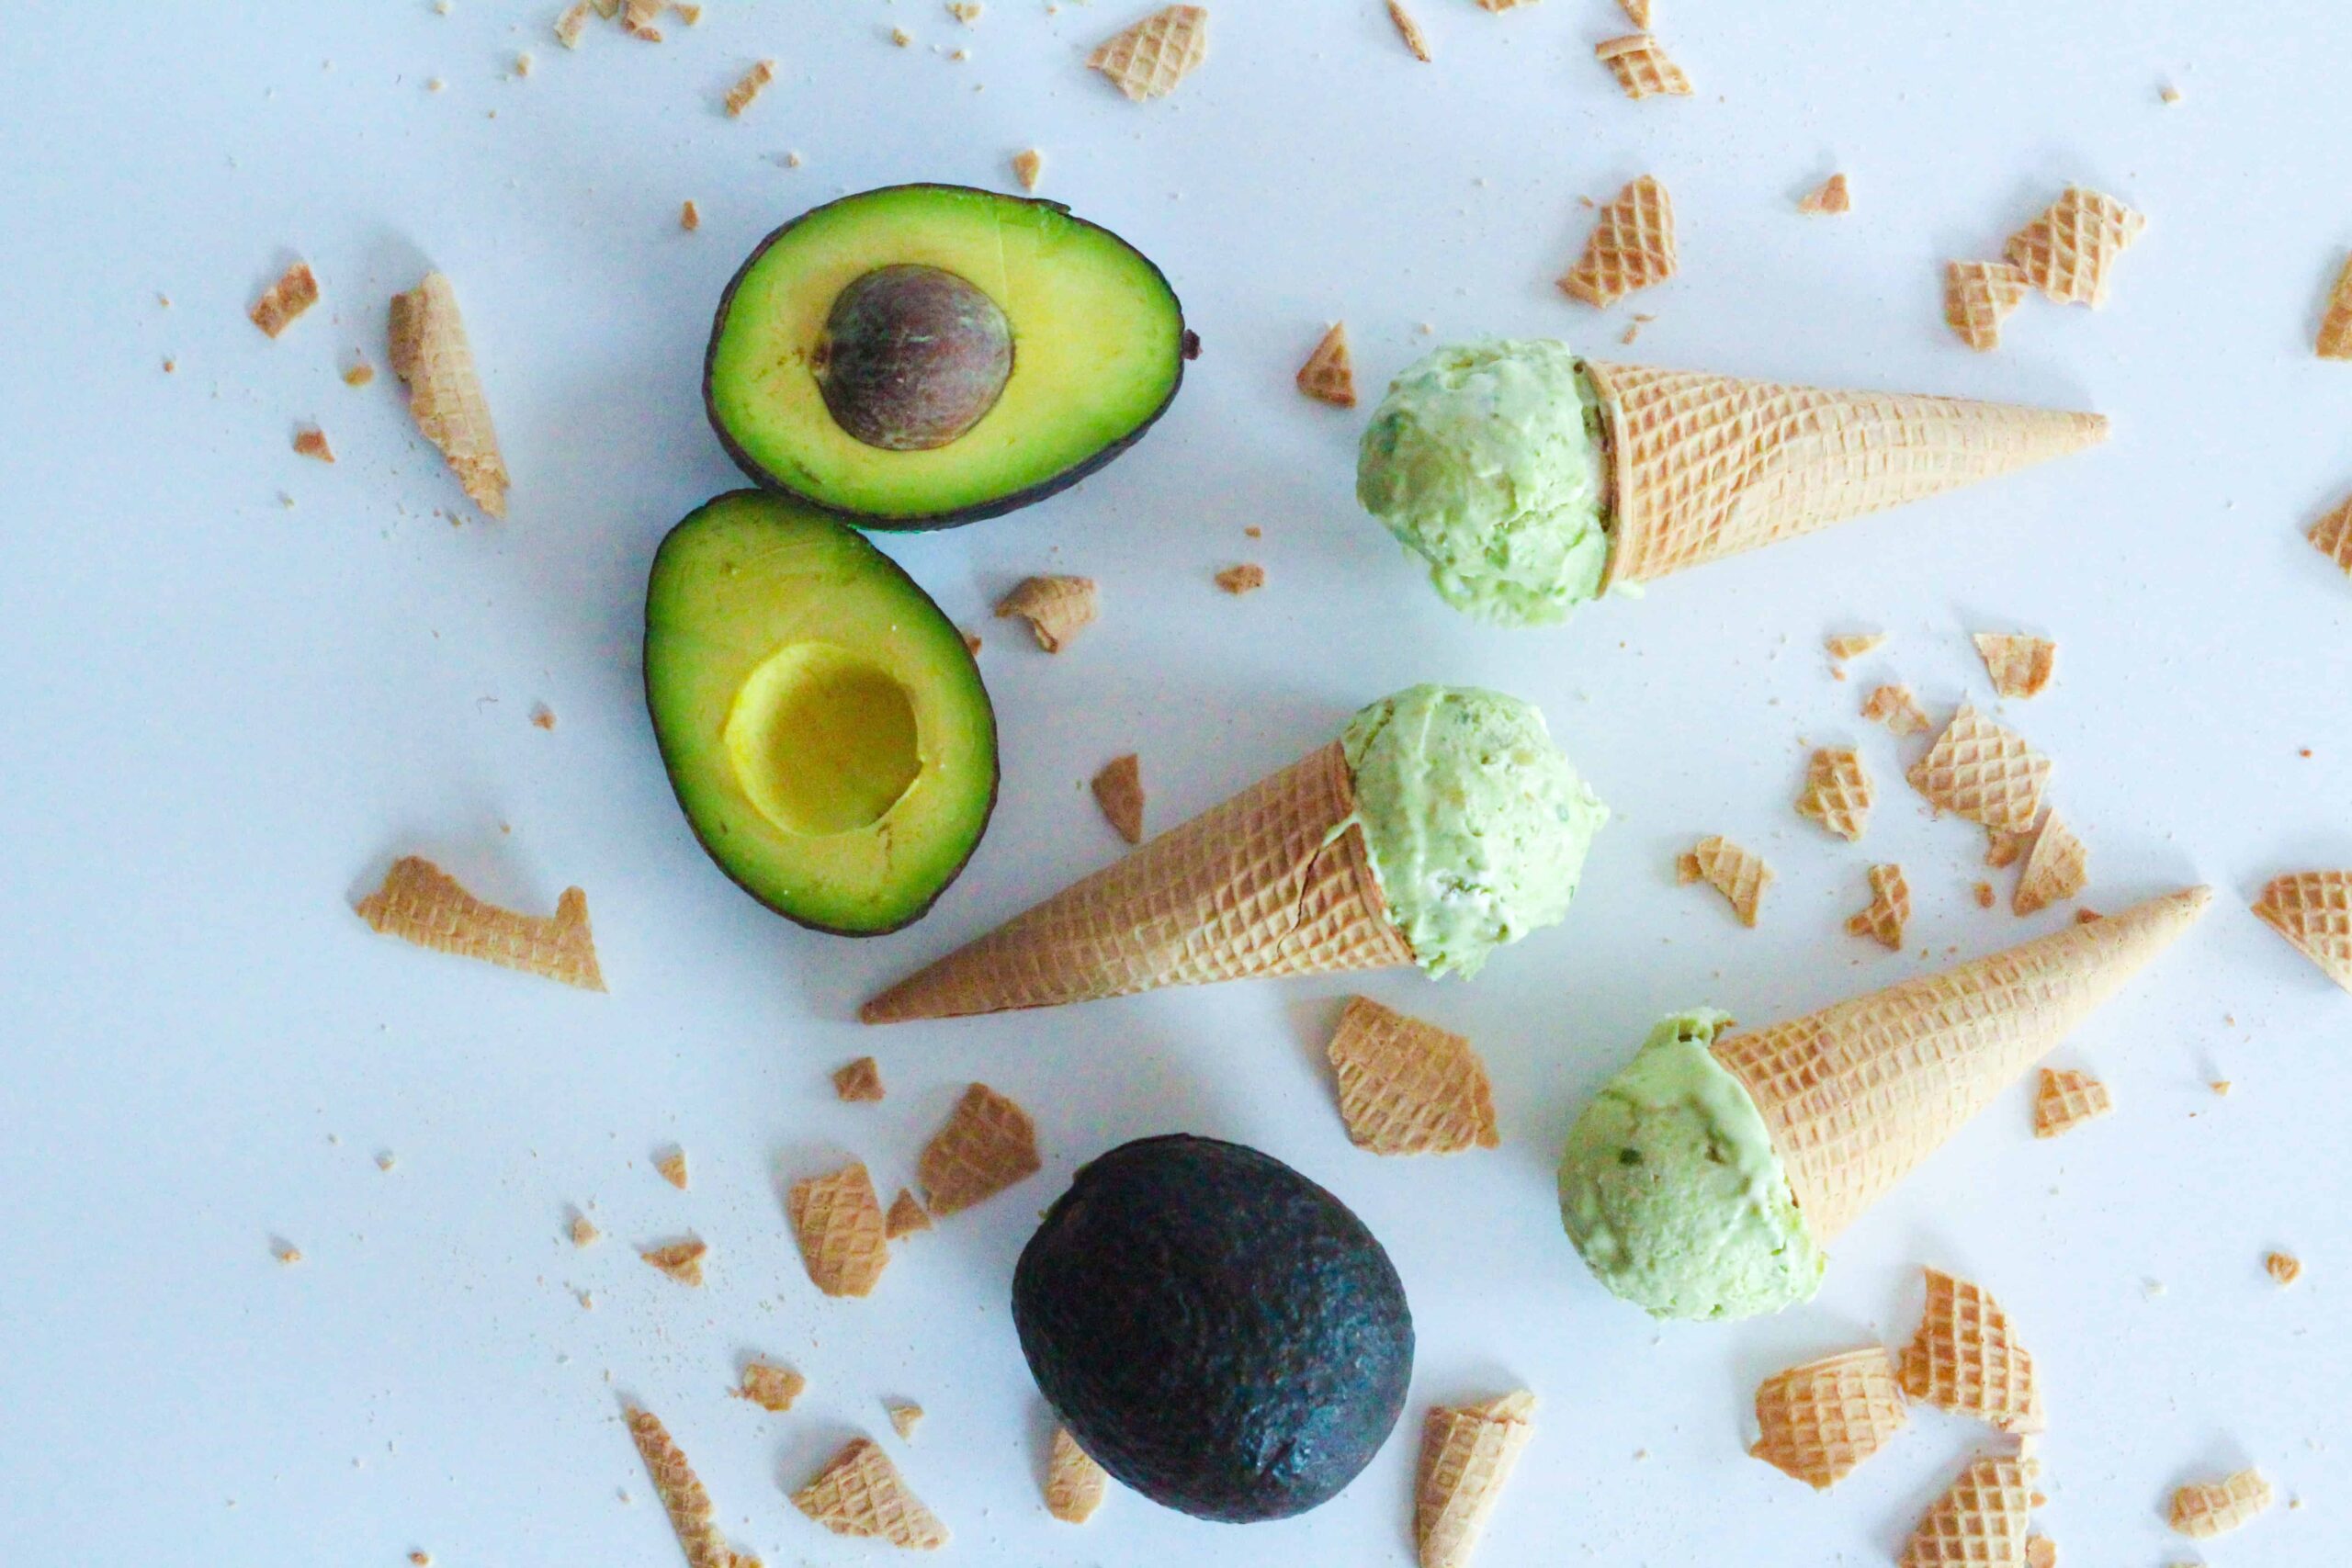 Top down view of three cones, each with one scoop of avocado ice cream on each cone. The cones are laying on their sides on a white surface, facing alternate directions. There are two halves of an avocado in the upper left corner and a whole avocado in the lower center. There are broken pieces of ice cream cones surrounding the cones and avocados.